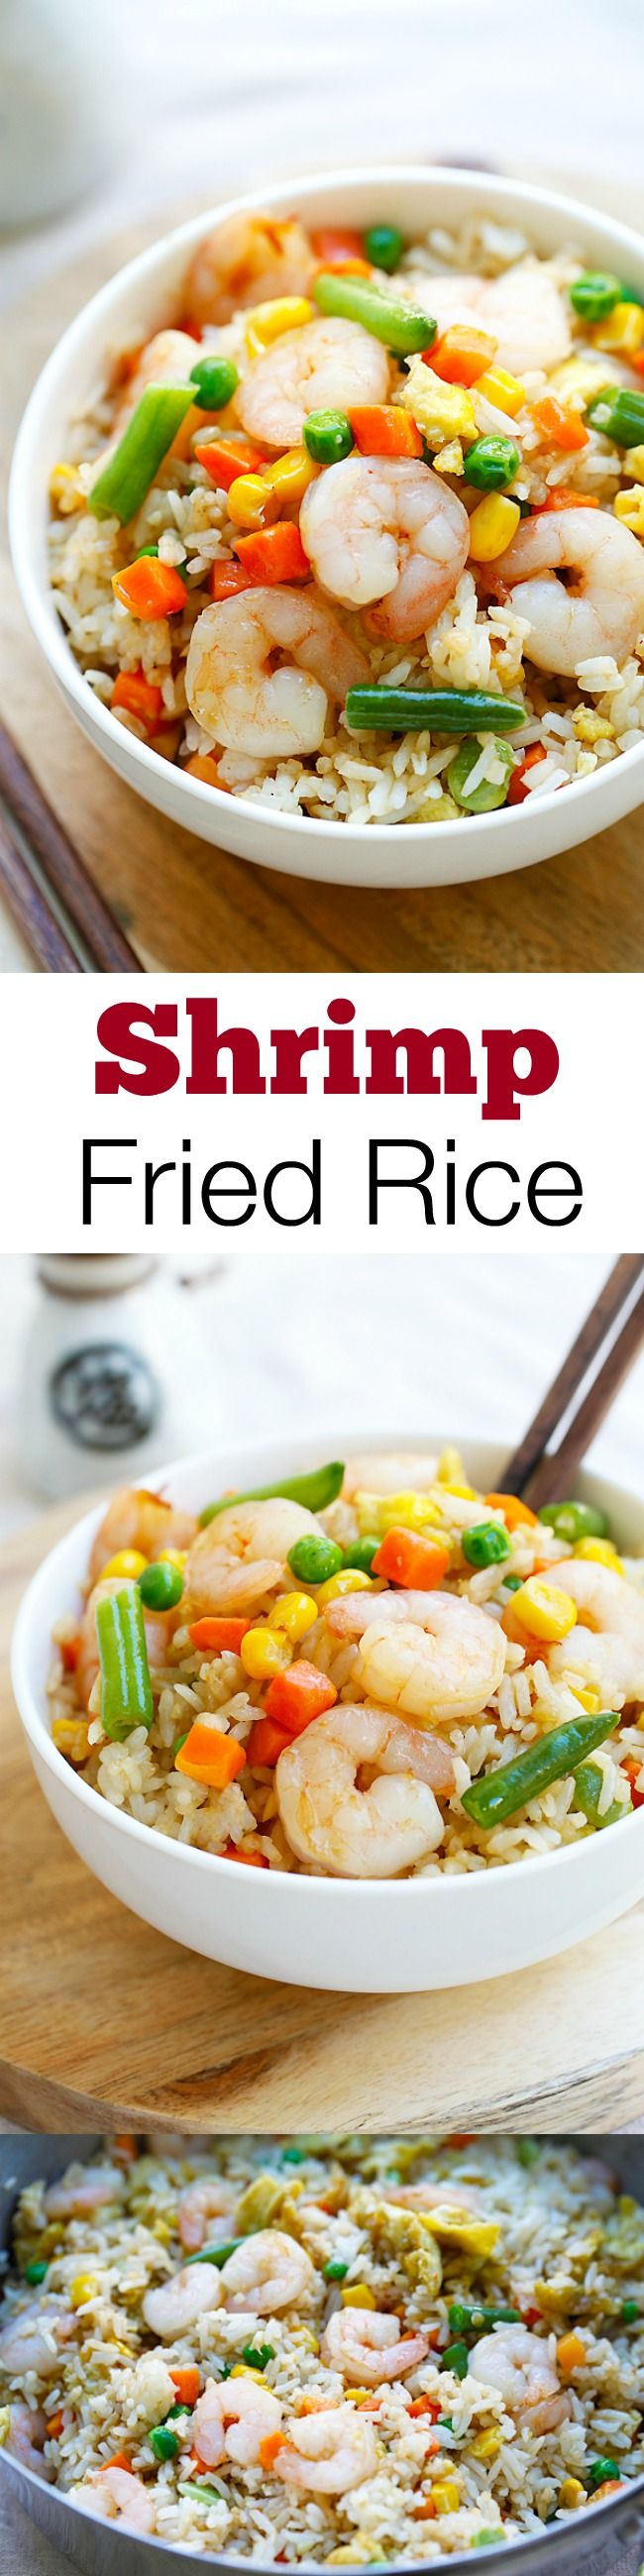 Shrimp fried rice – the easiest shrimp fried rice recipe, takes only 20 mins from prep to dinner table. Healthier and a zillion times better than takeout | rasamalaysia.com